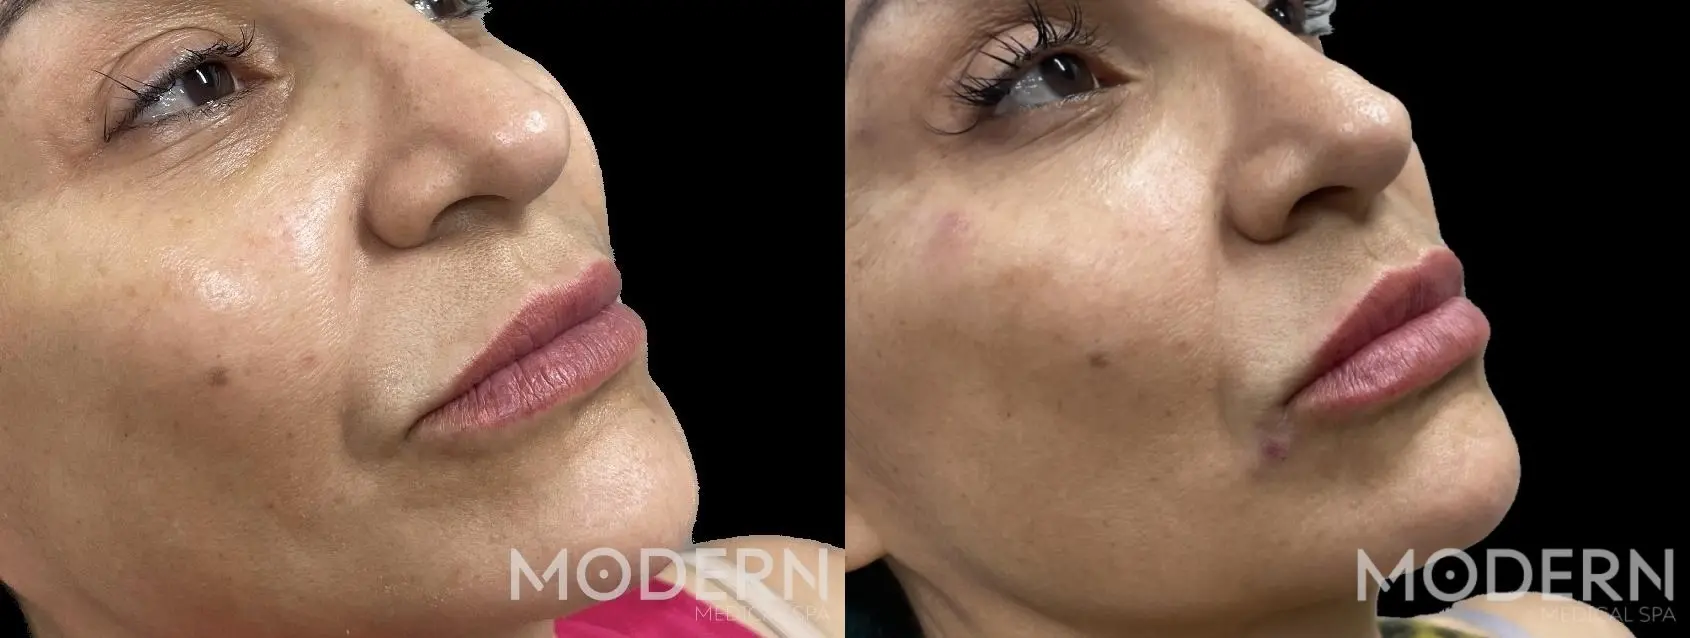 Use Restylane Kysse fdermal filler for volume and replenishing of the lips - Before and After